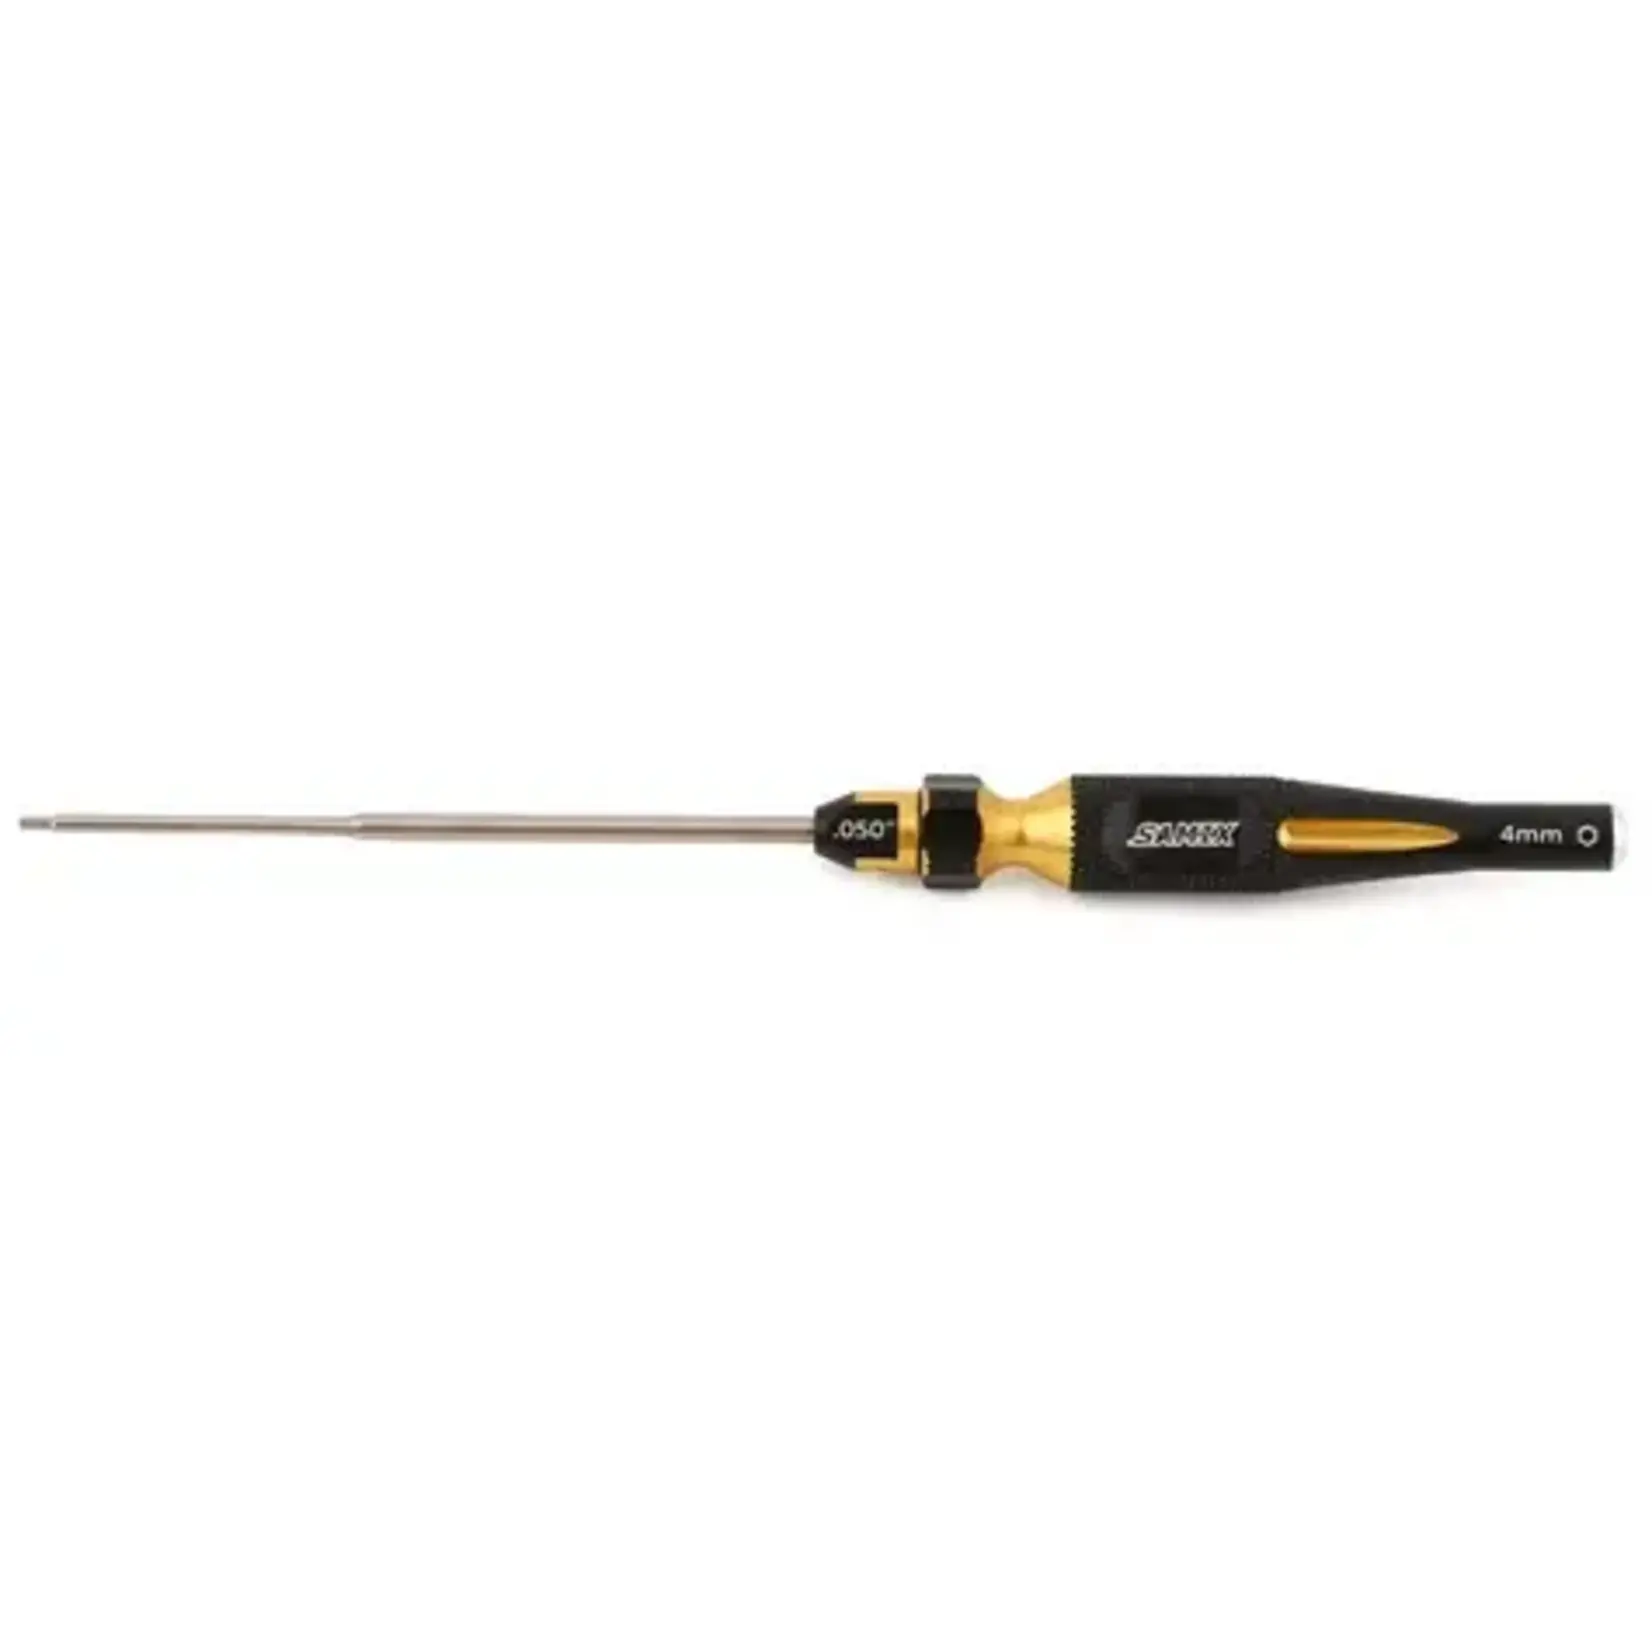 Samix SCX24 2-in-1 Hex Wrench/Nut Driver (Gold)